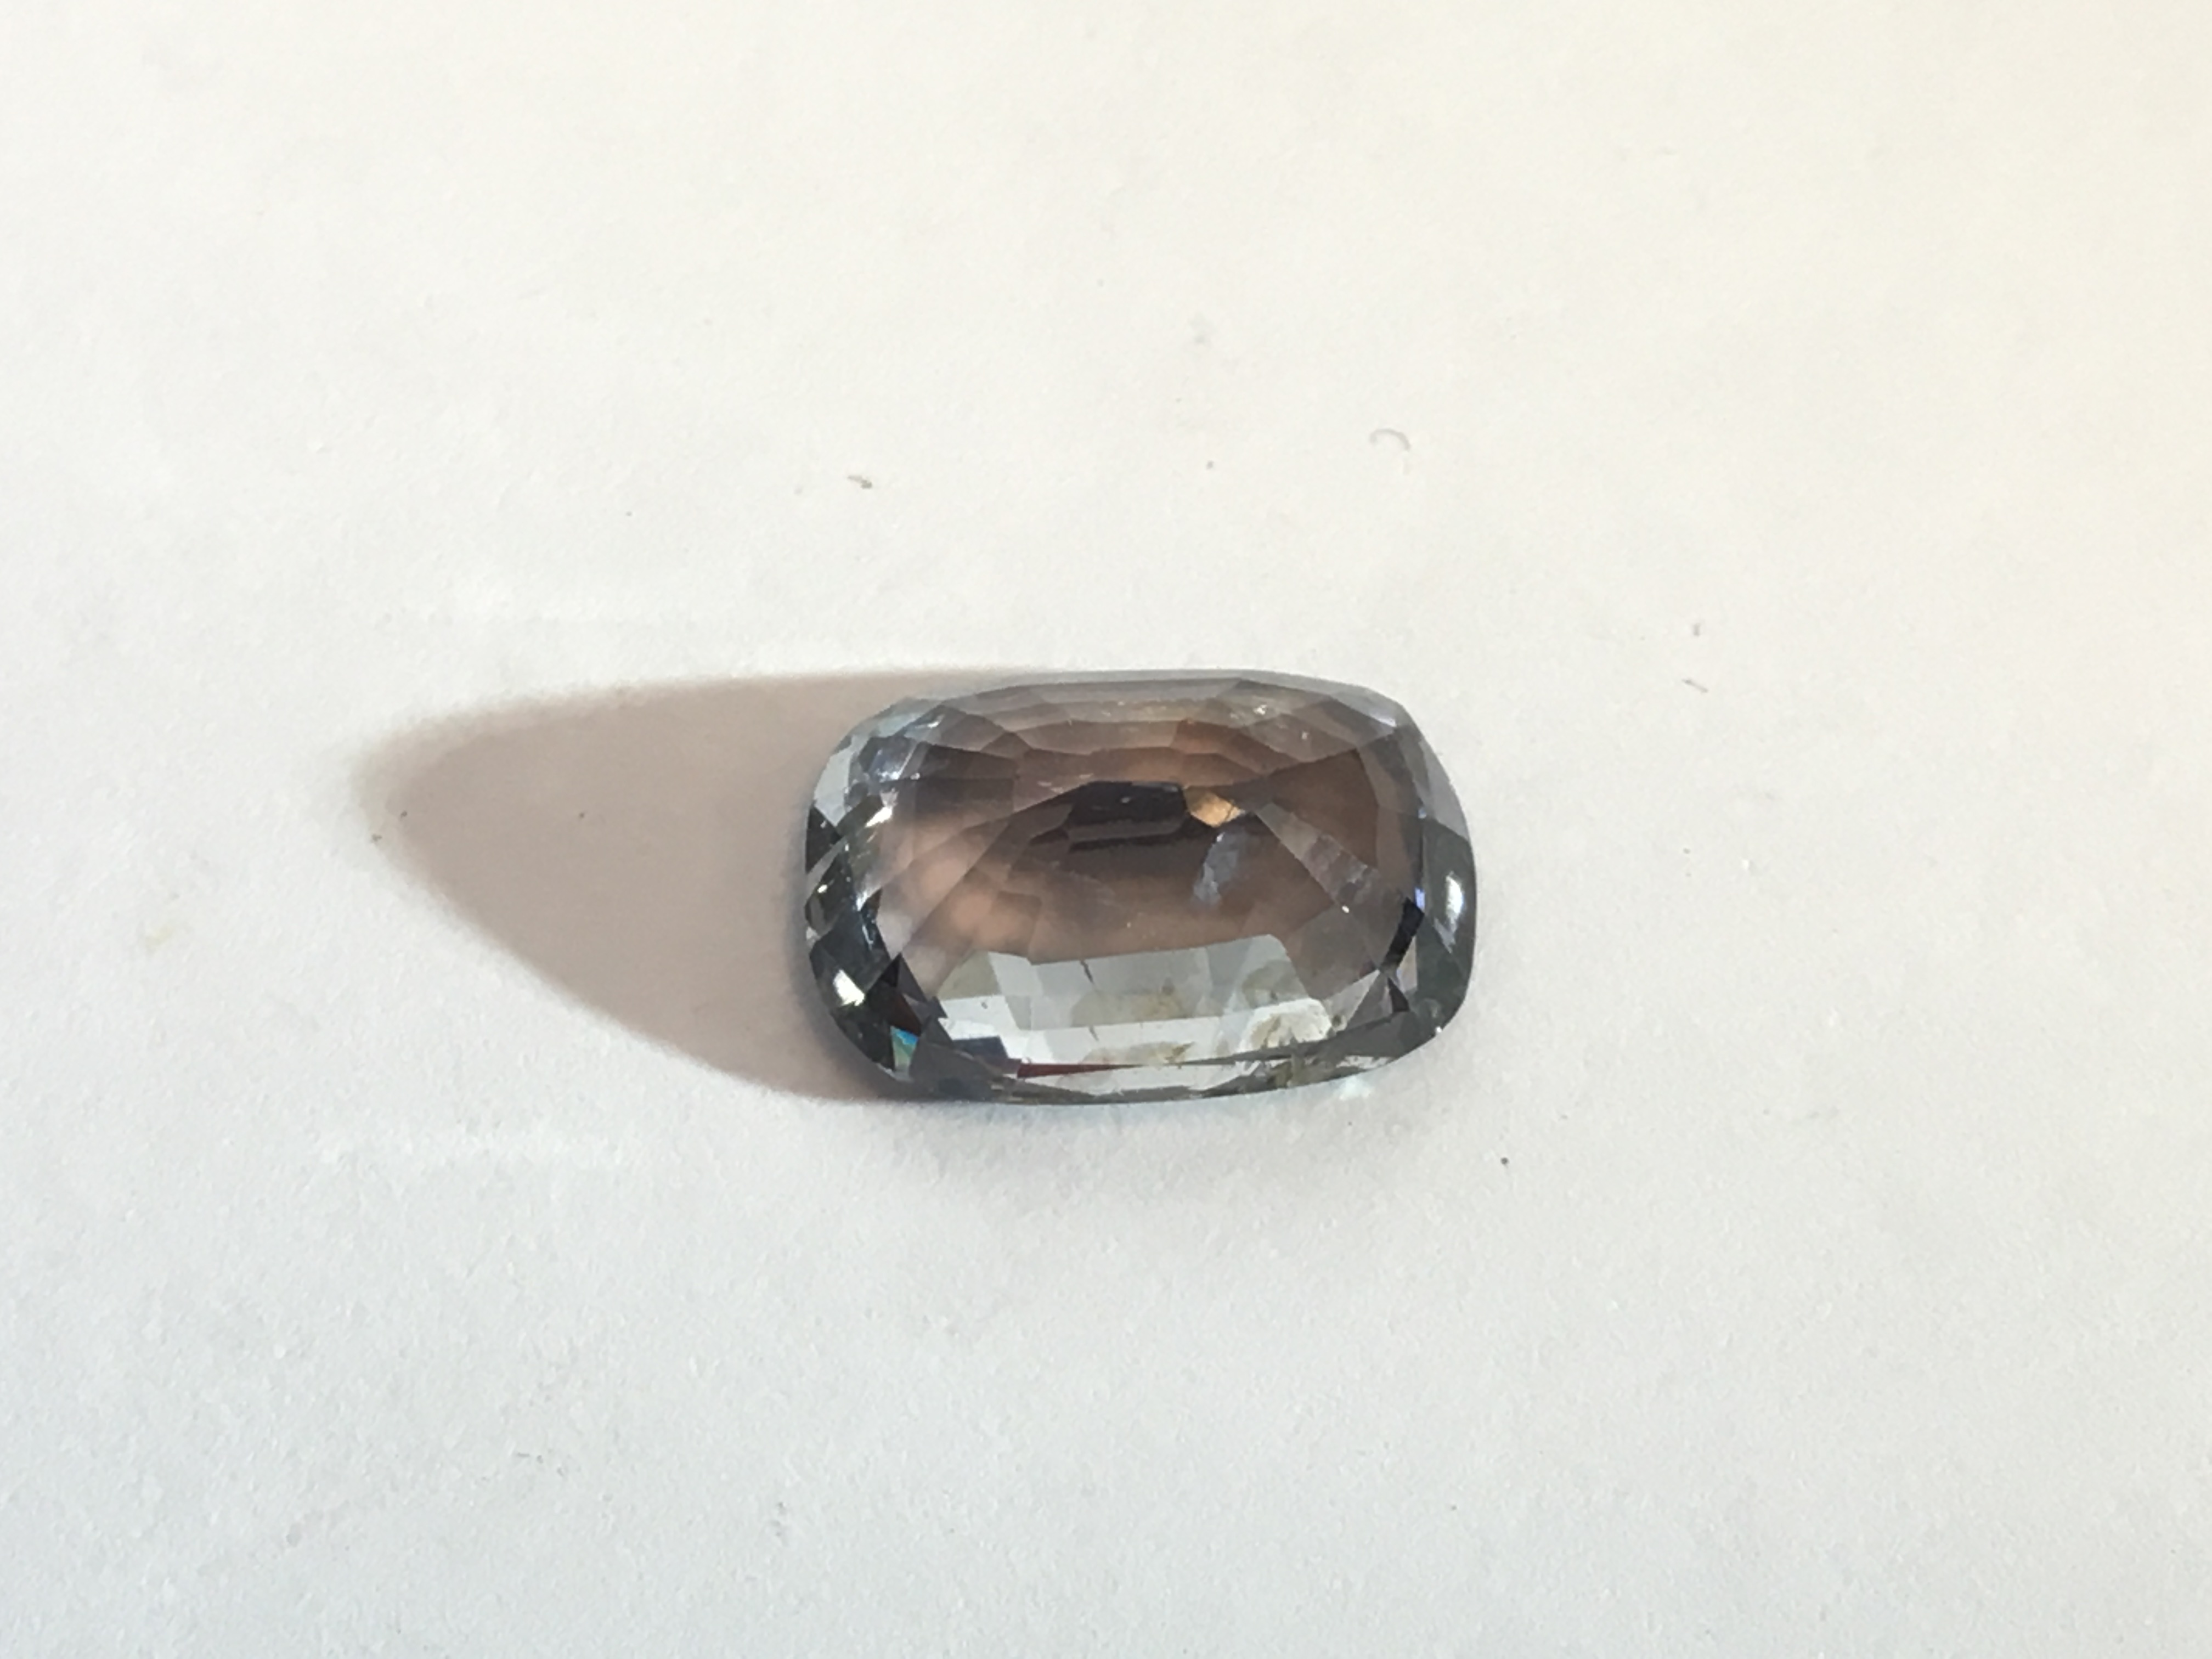 4.31ct Natural Spinel with IGI Certificate - Image 2 of 4